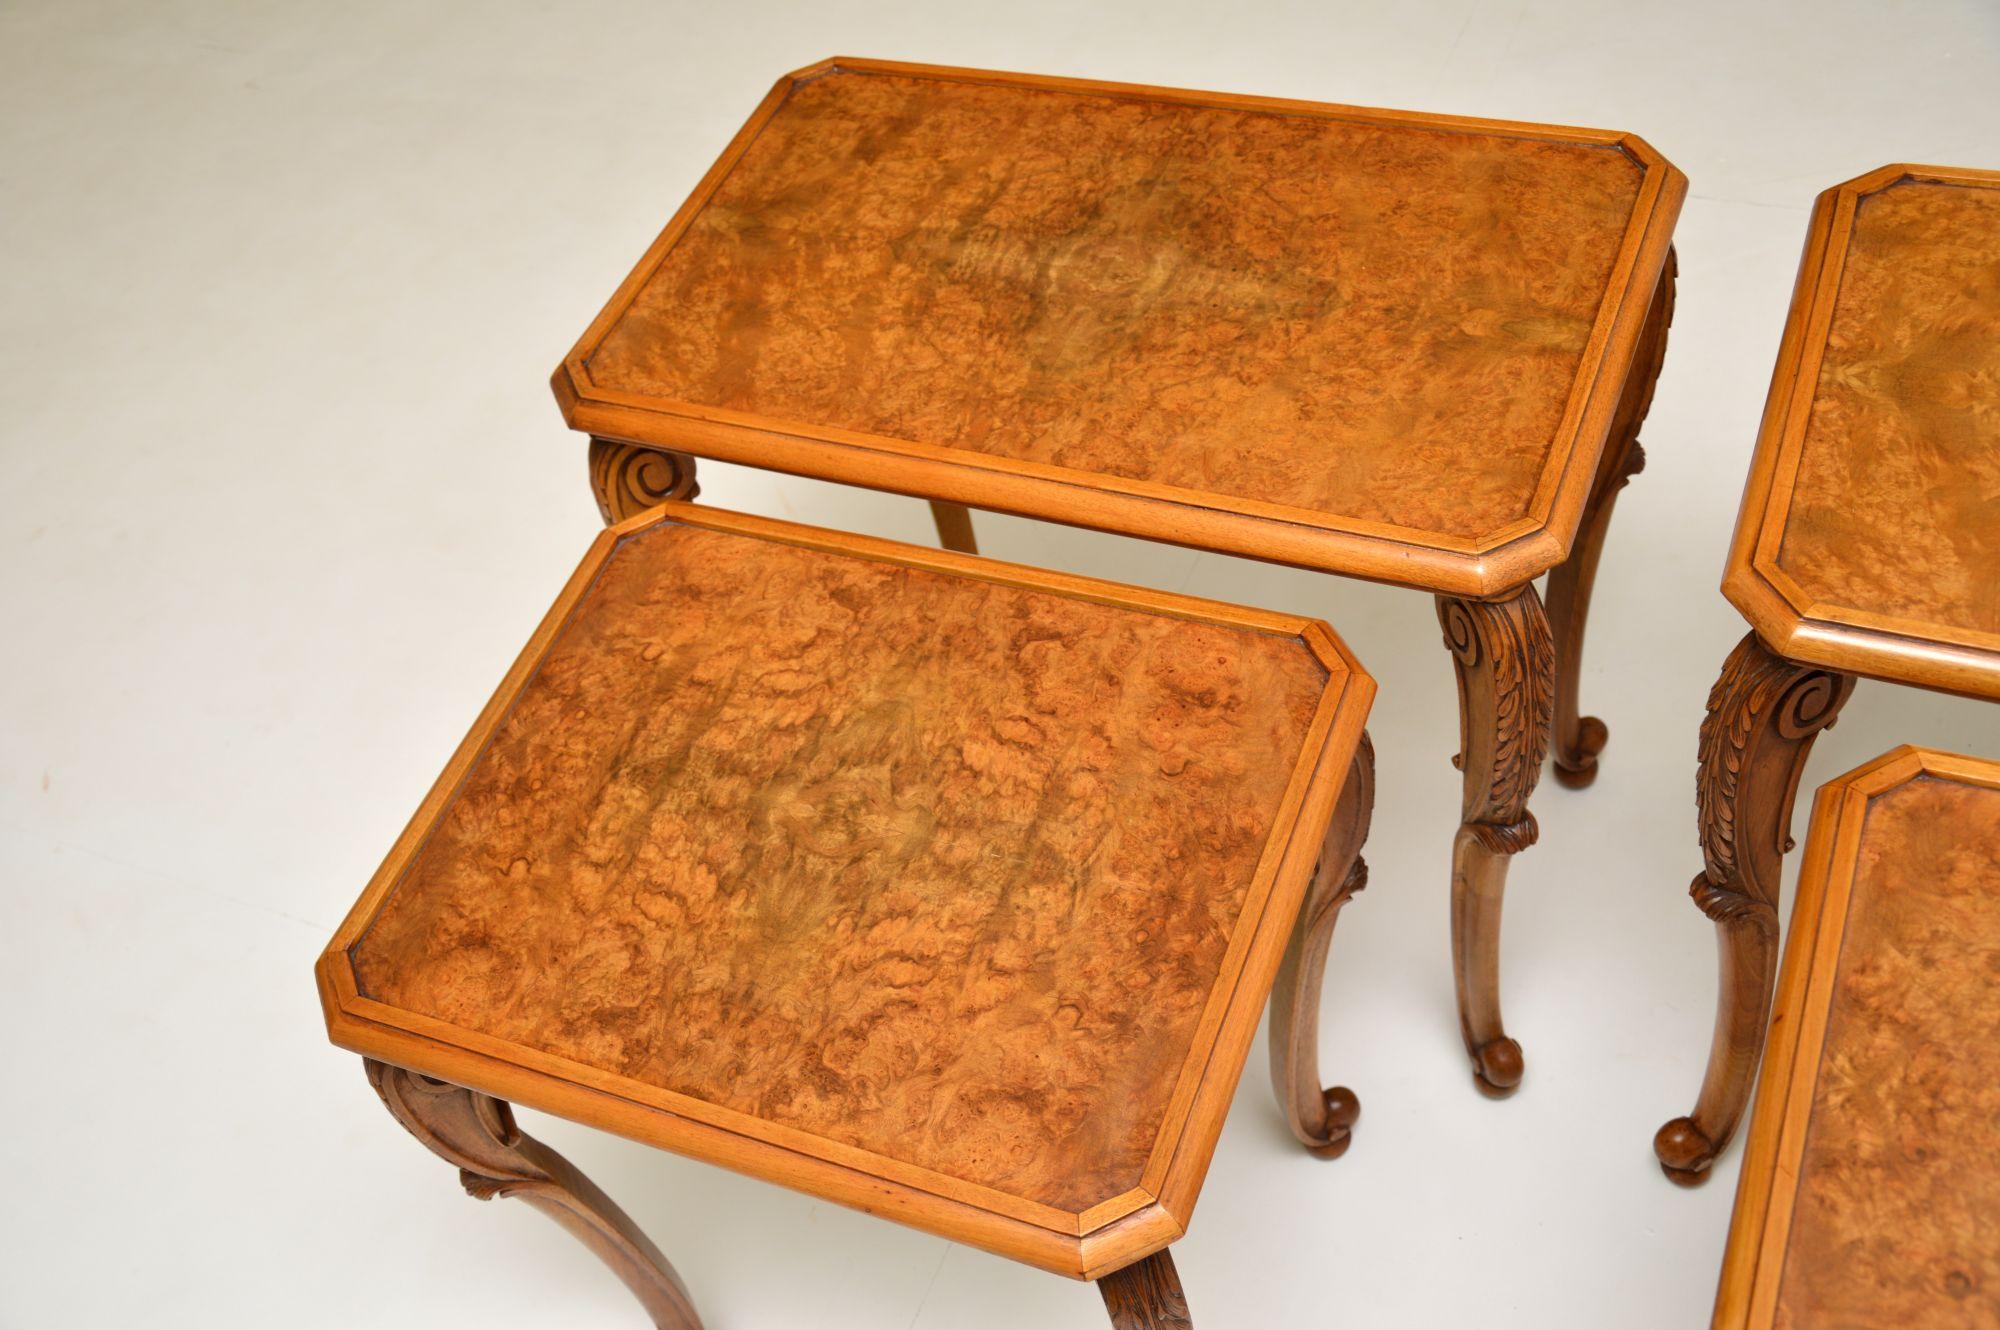 Early 20th Century Pair of Antique Burr Walnut Nesting Side Tables